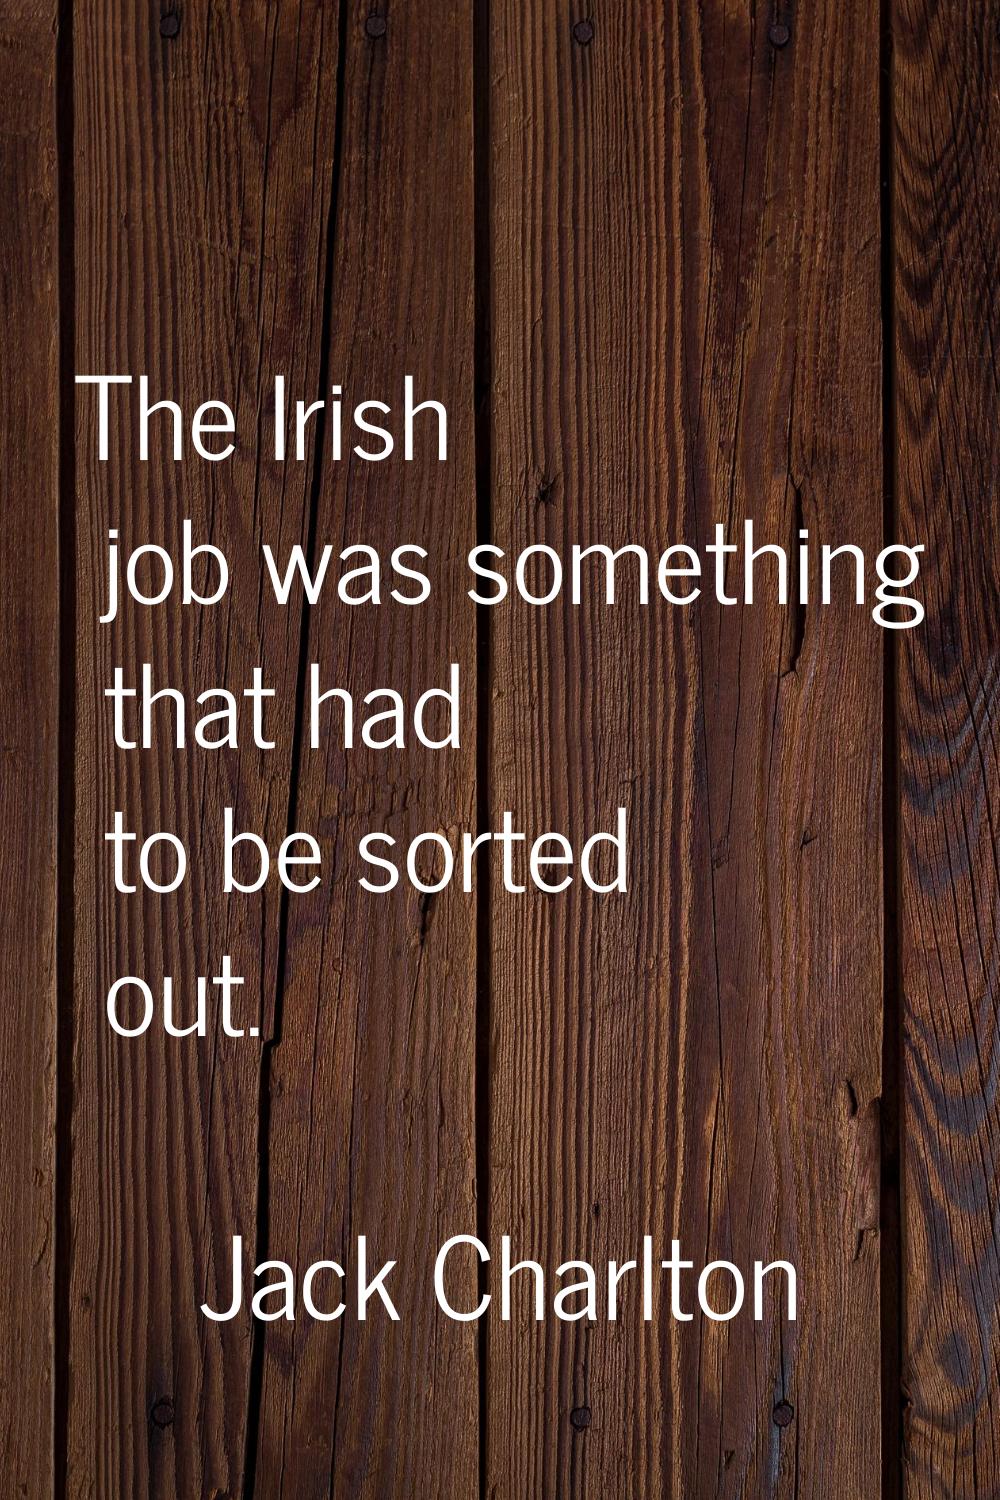 The Irish job was something that had to be sorted out.